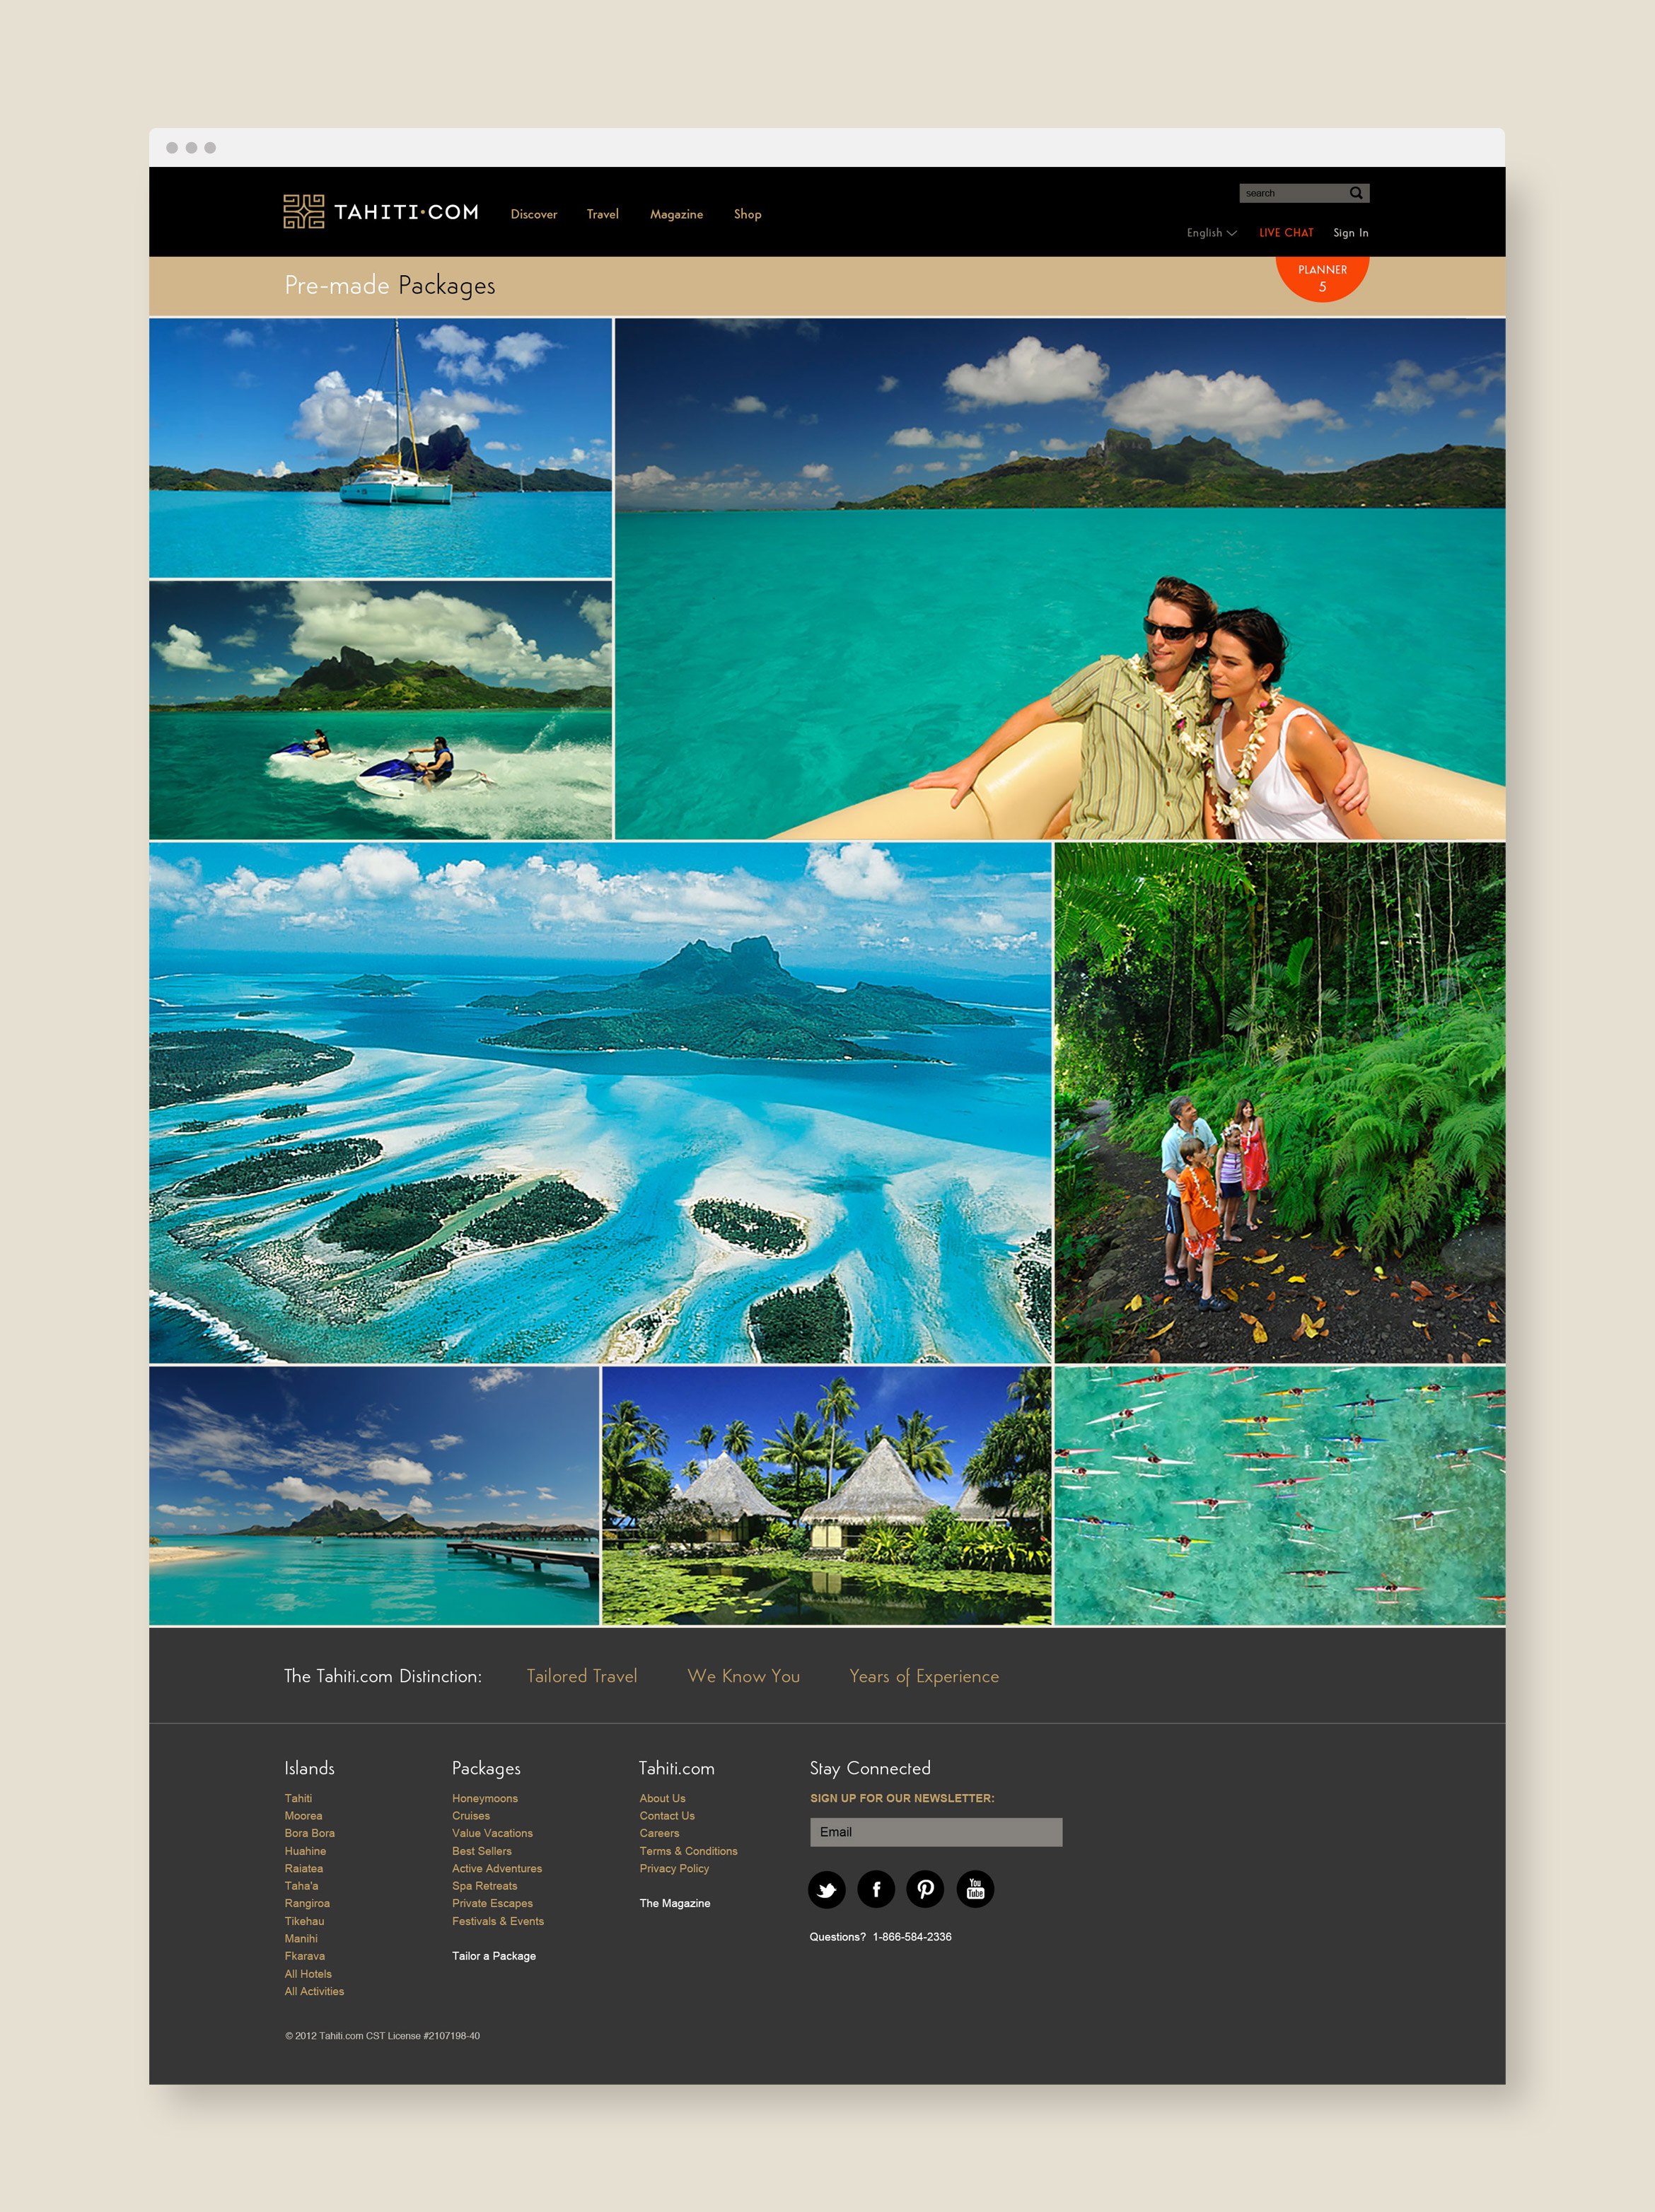 tahiti.com premade vacation packages photo grid design